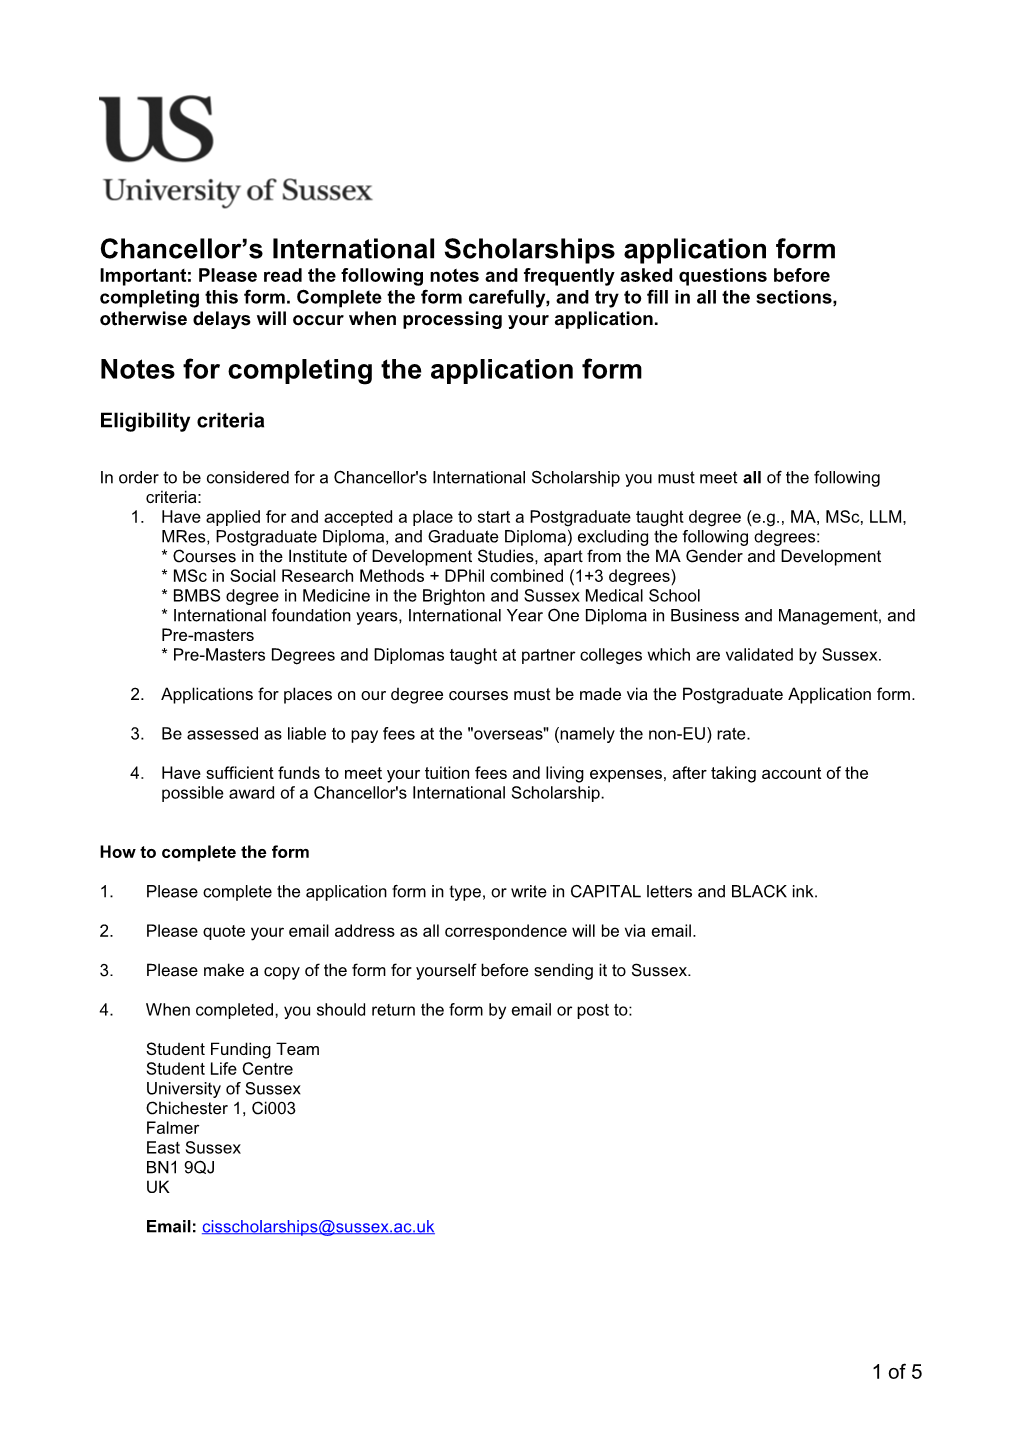 Application Form for Chancellor's International Scholarship